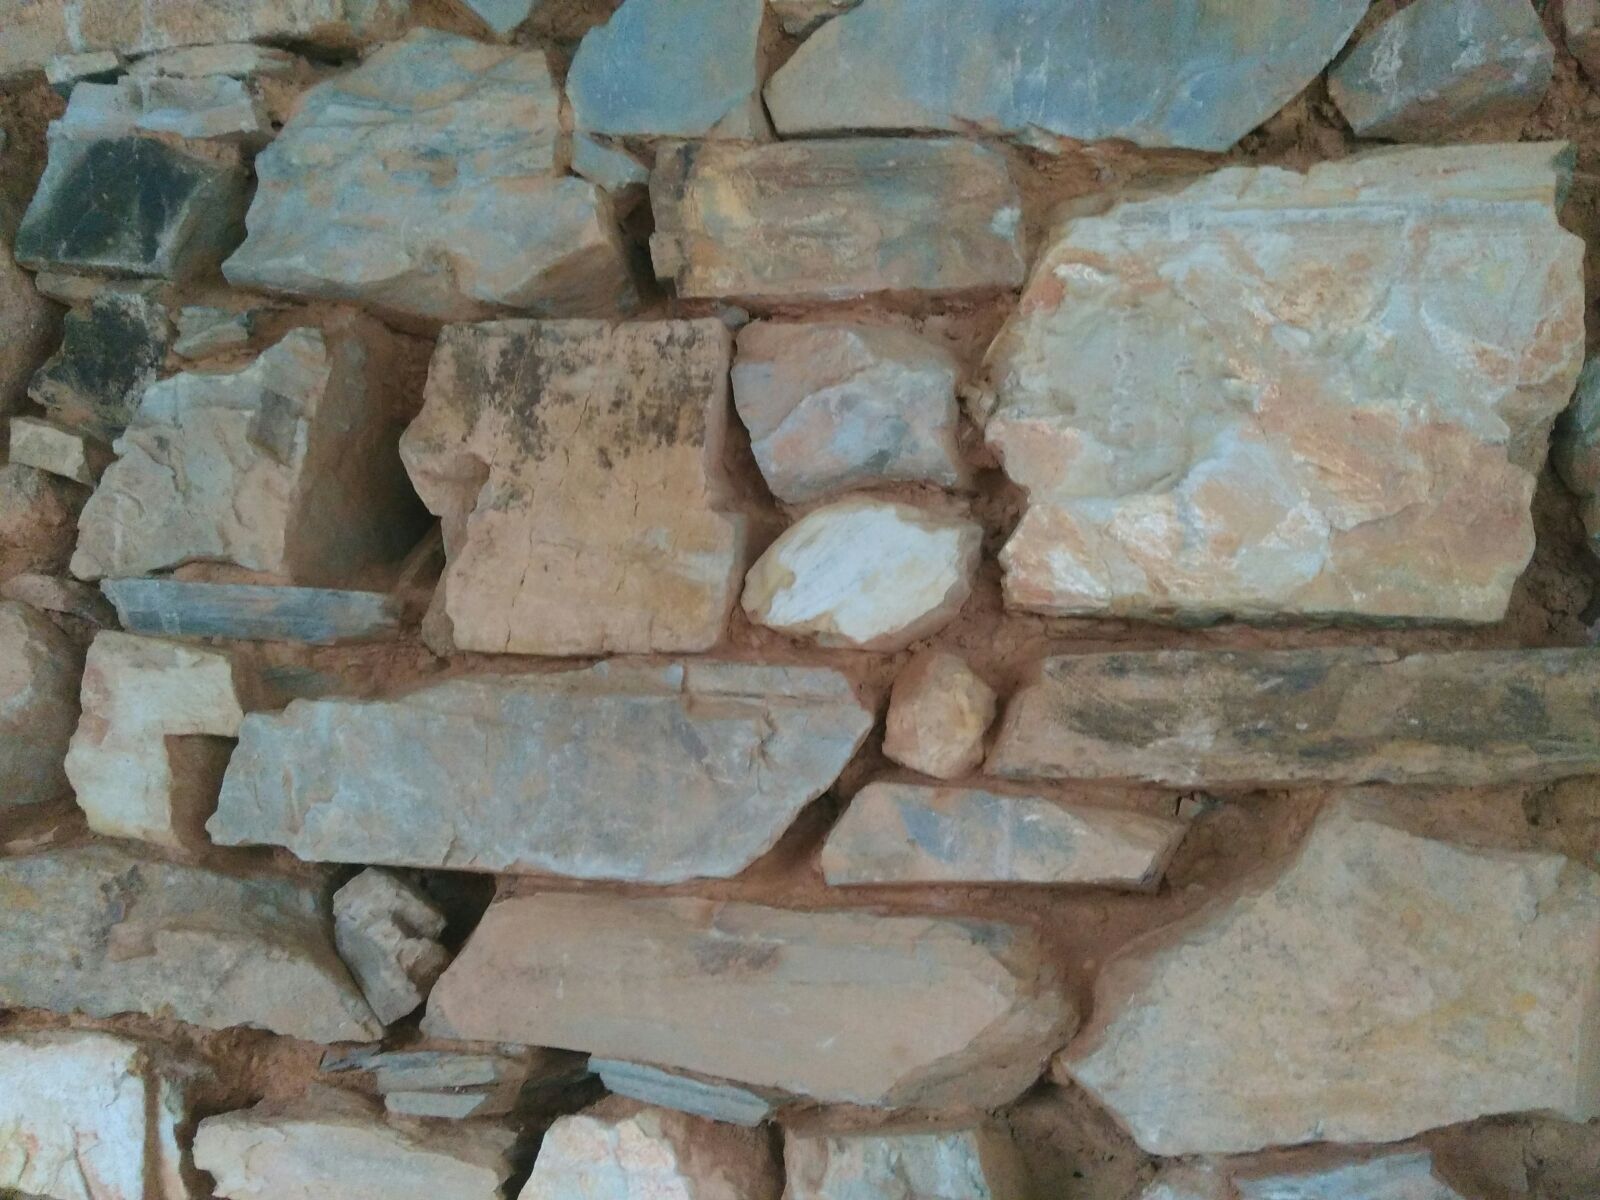 Detail of a cleaned patch of stonework wall prior to repointing it.